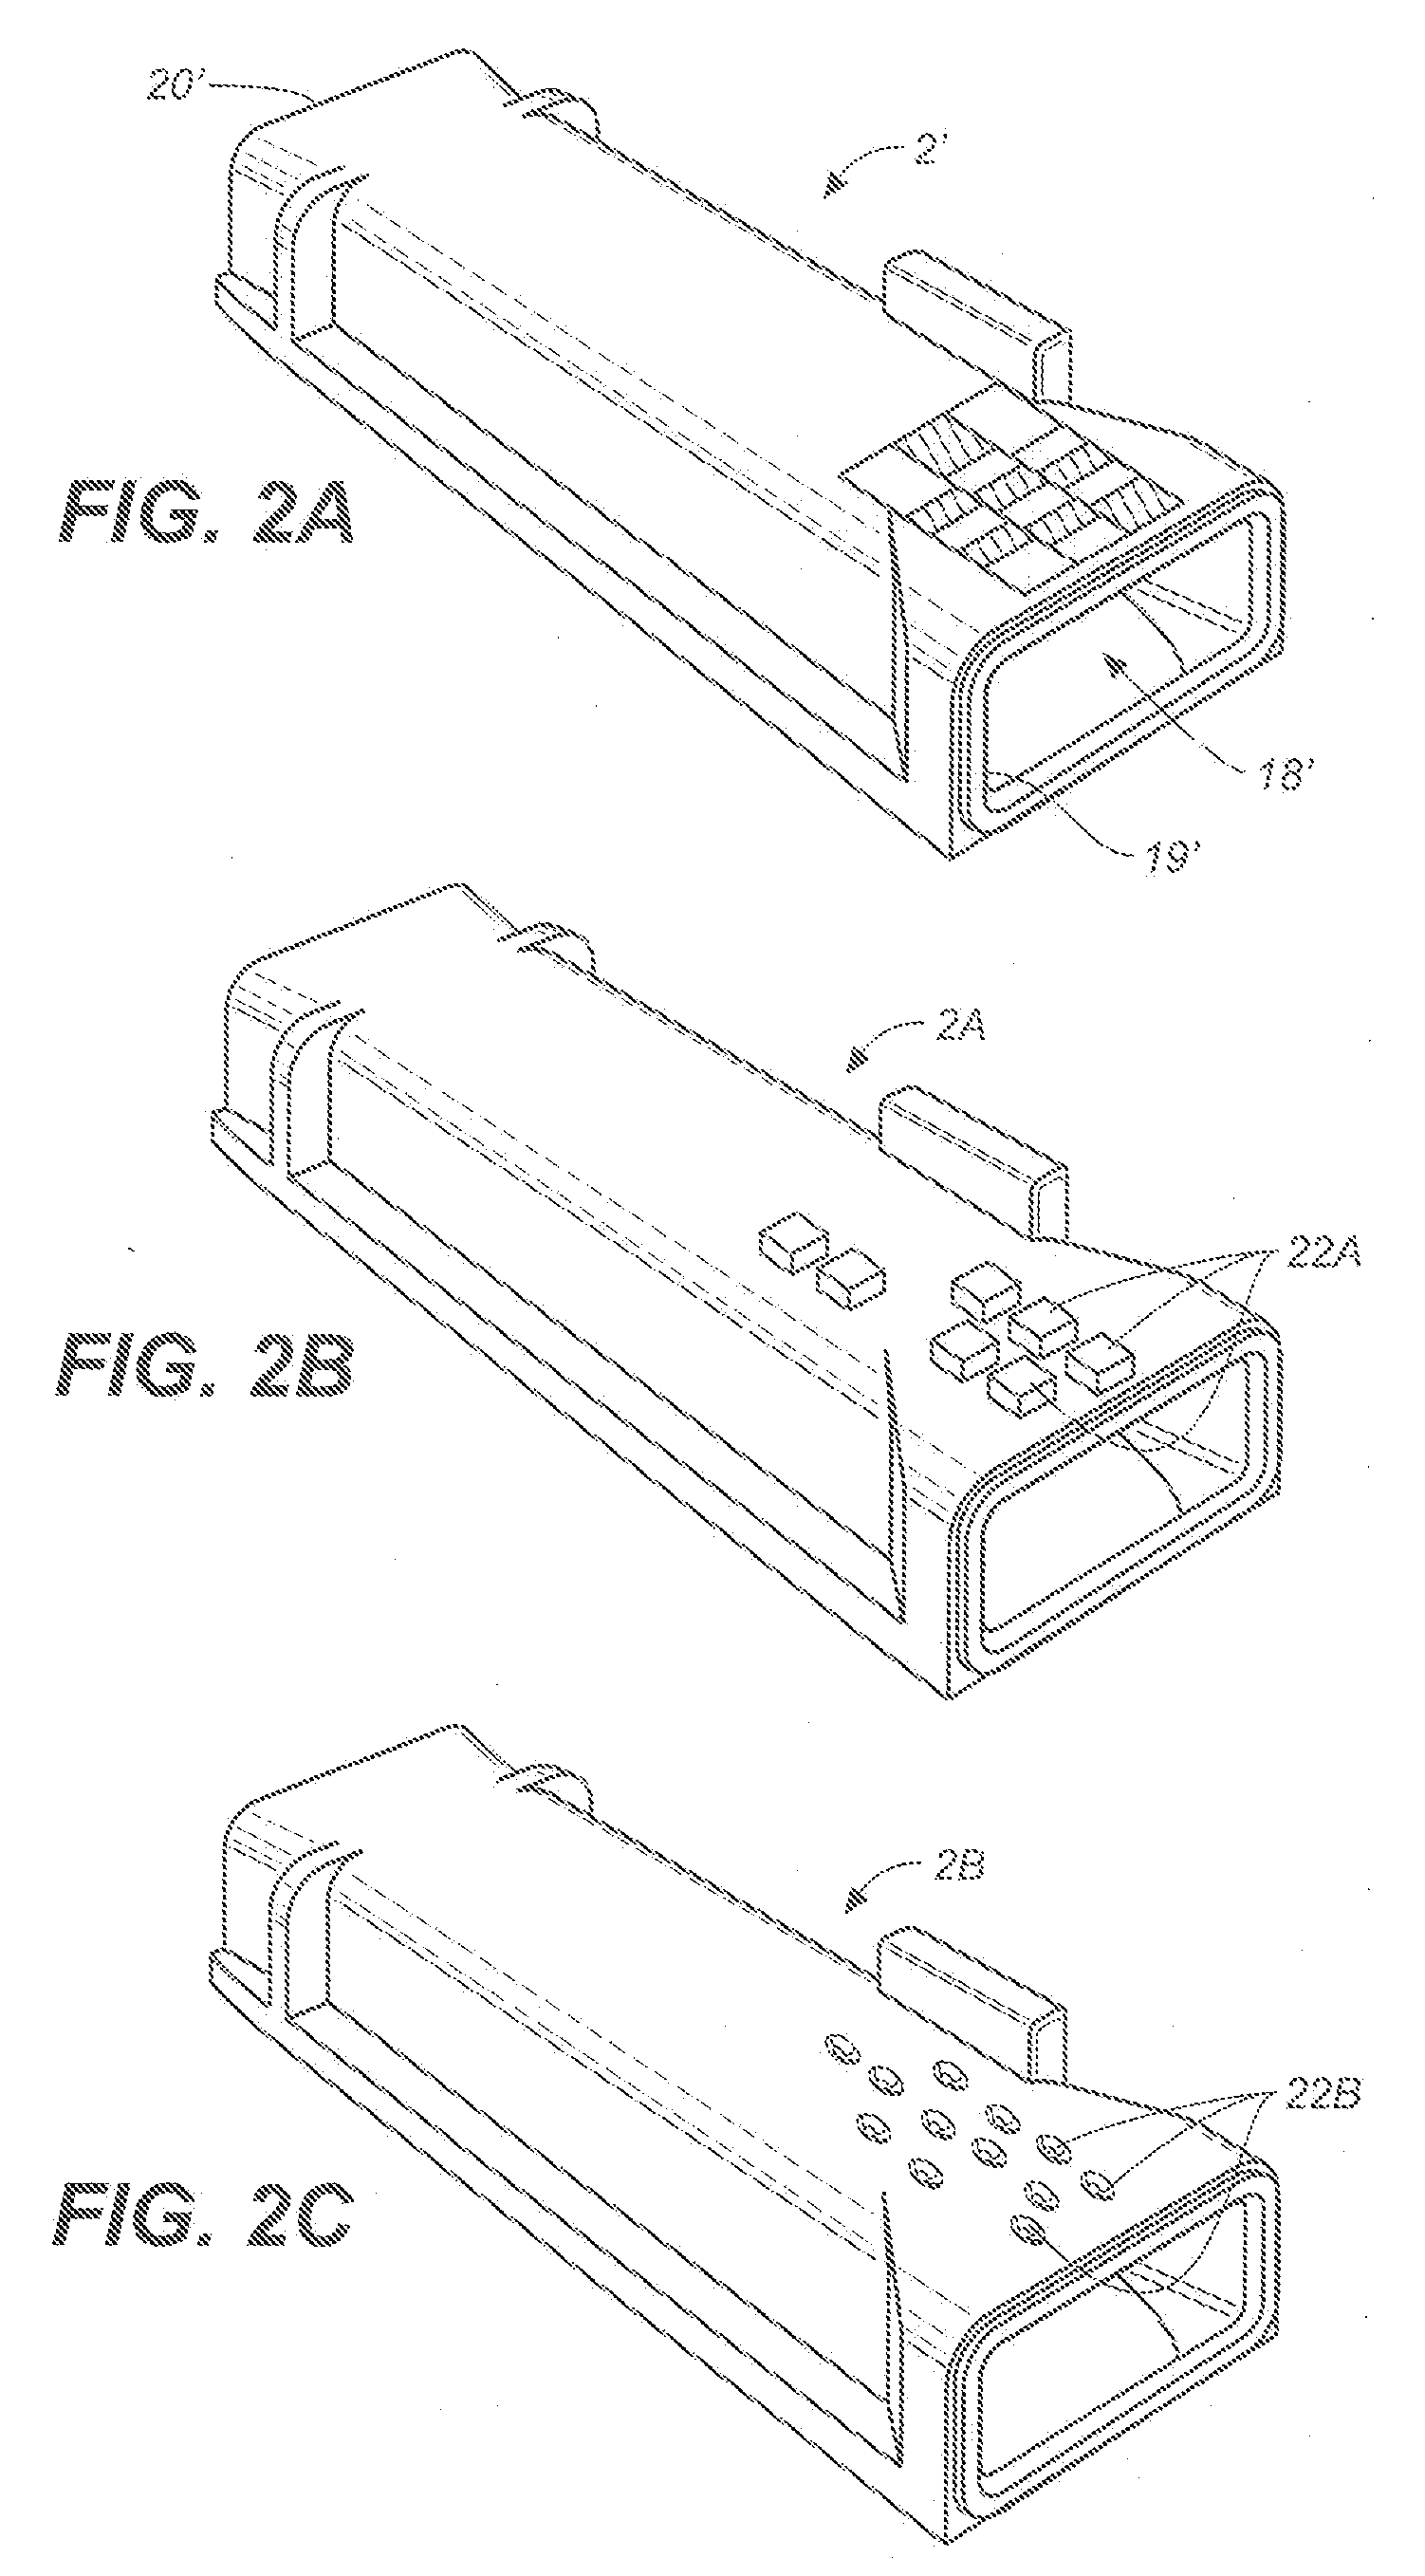 Methods of Transferring Data to a Medical Test Device